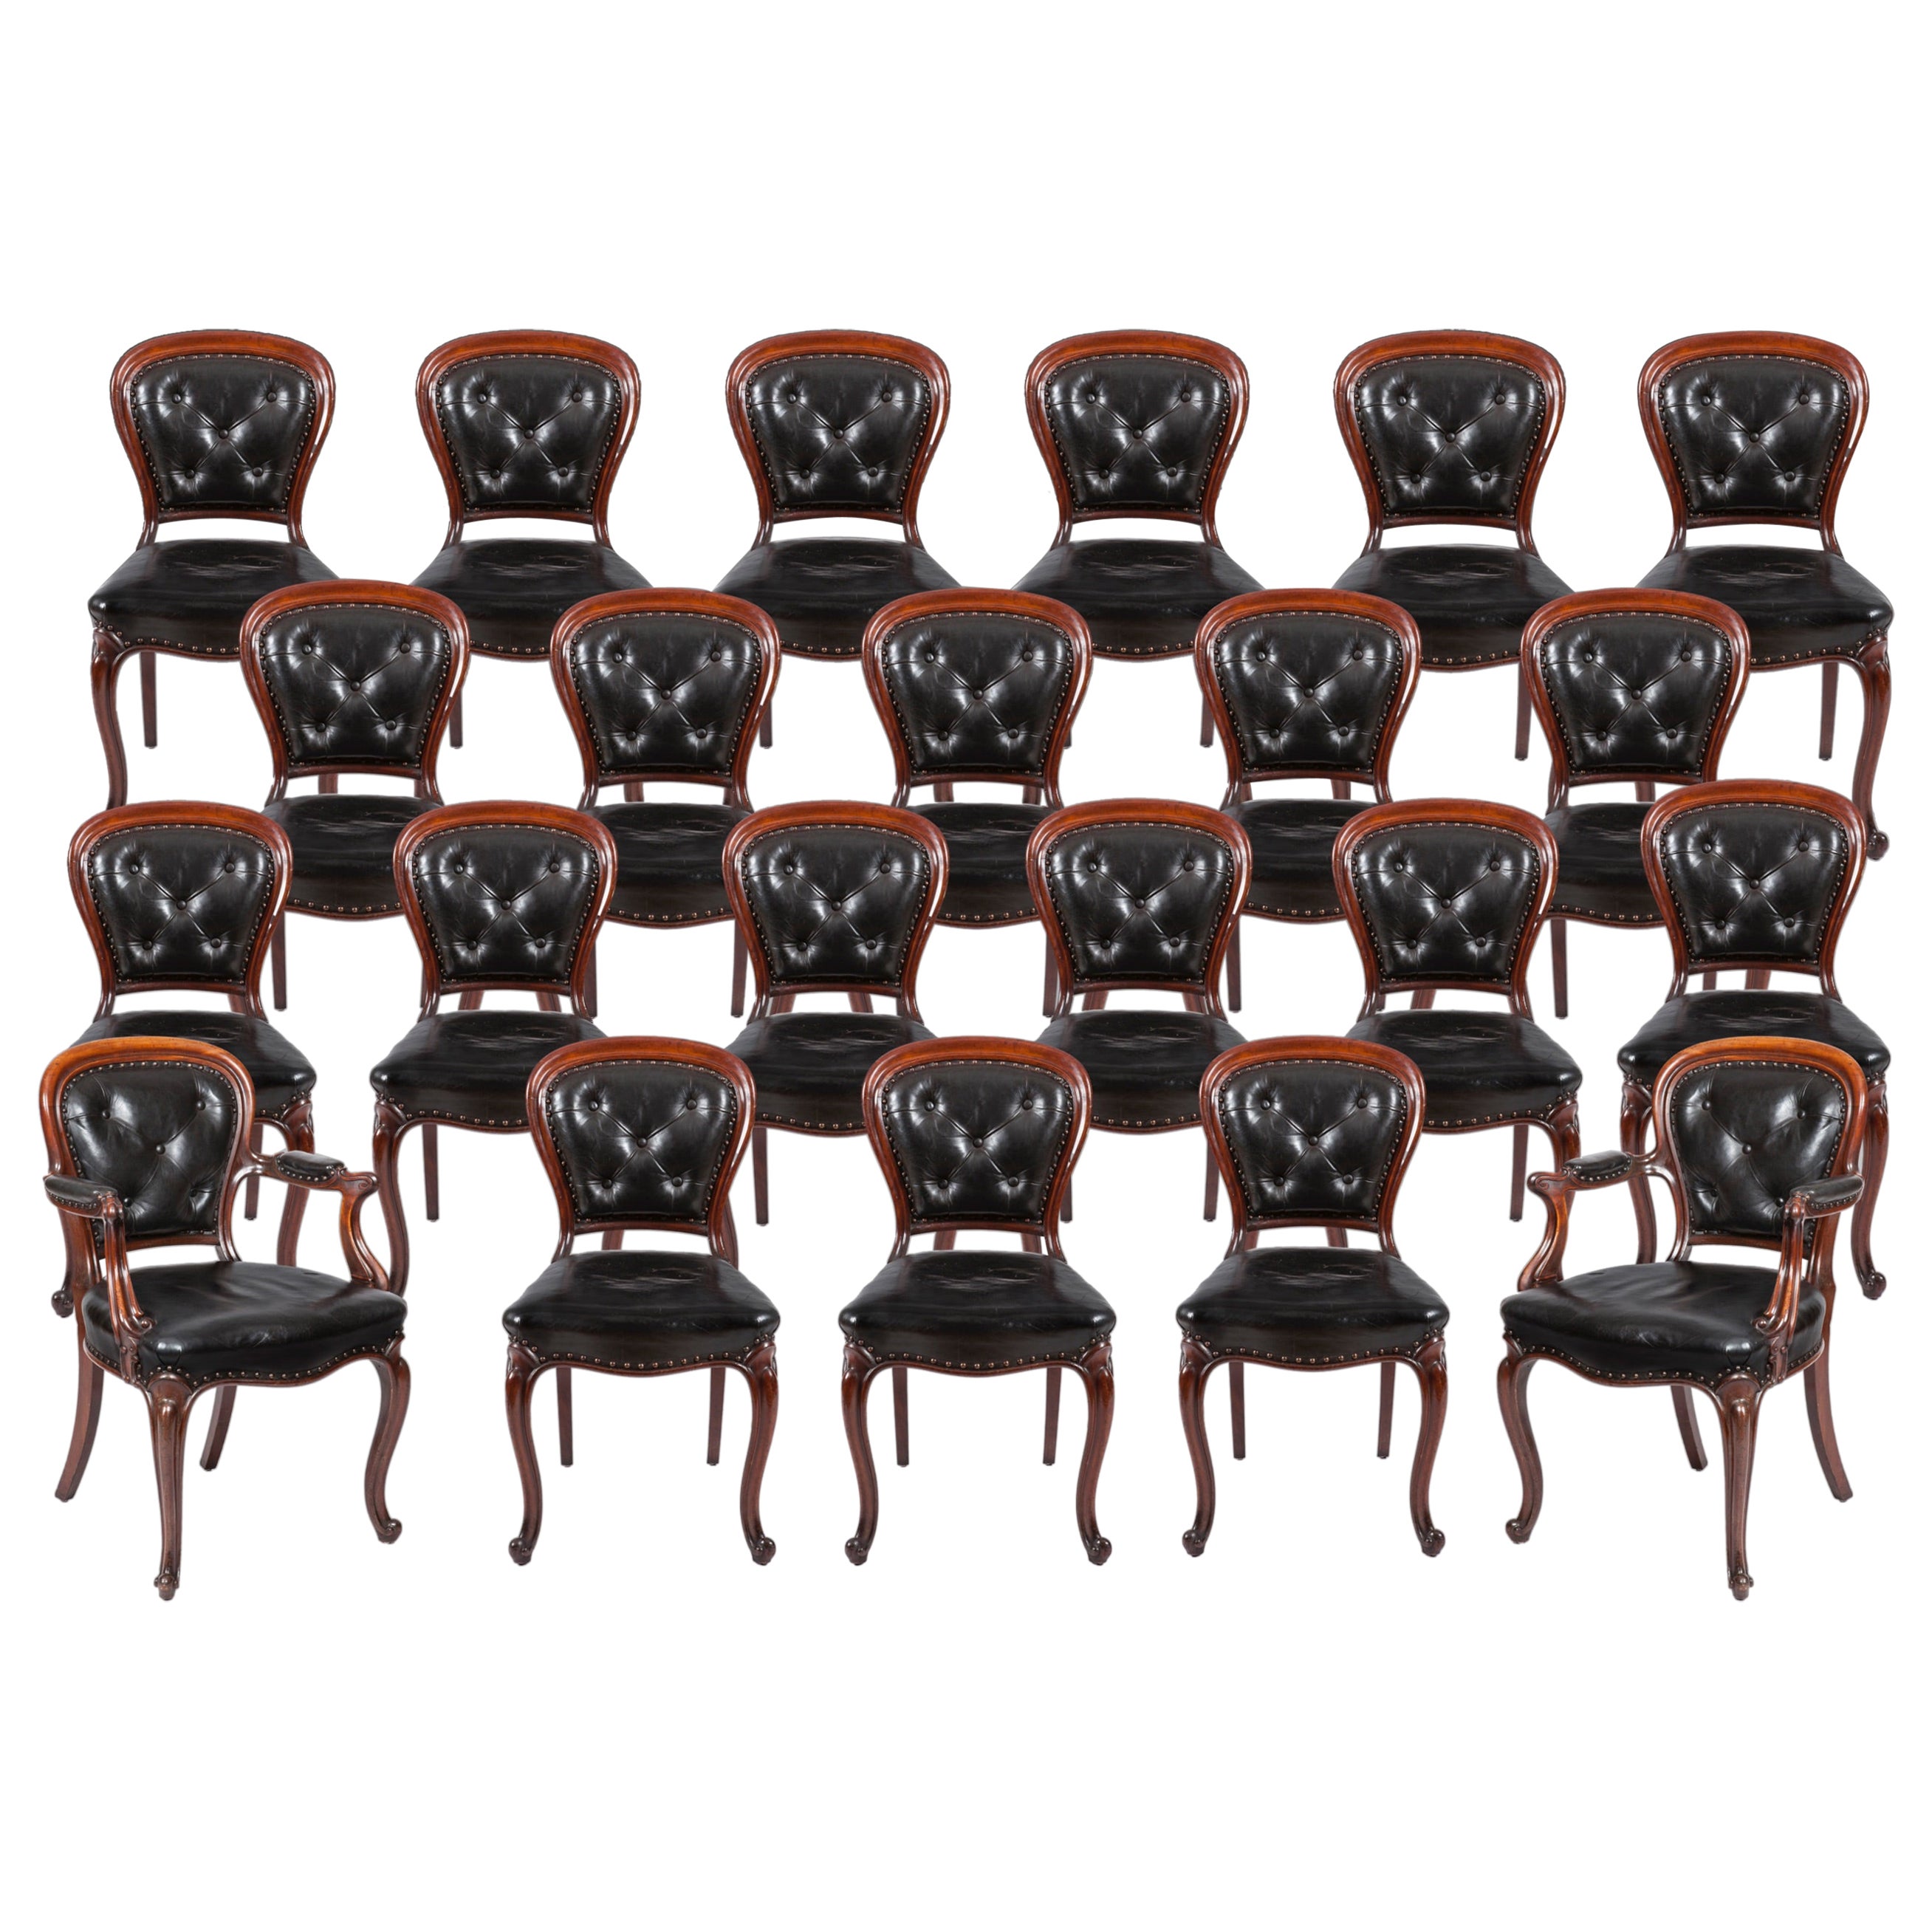 Rare Set of 22 Nineteenth Century Antique Dining Chairs with Leather Upholstery For Sale